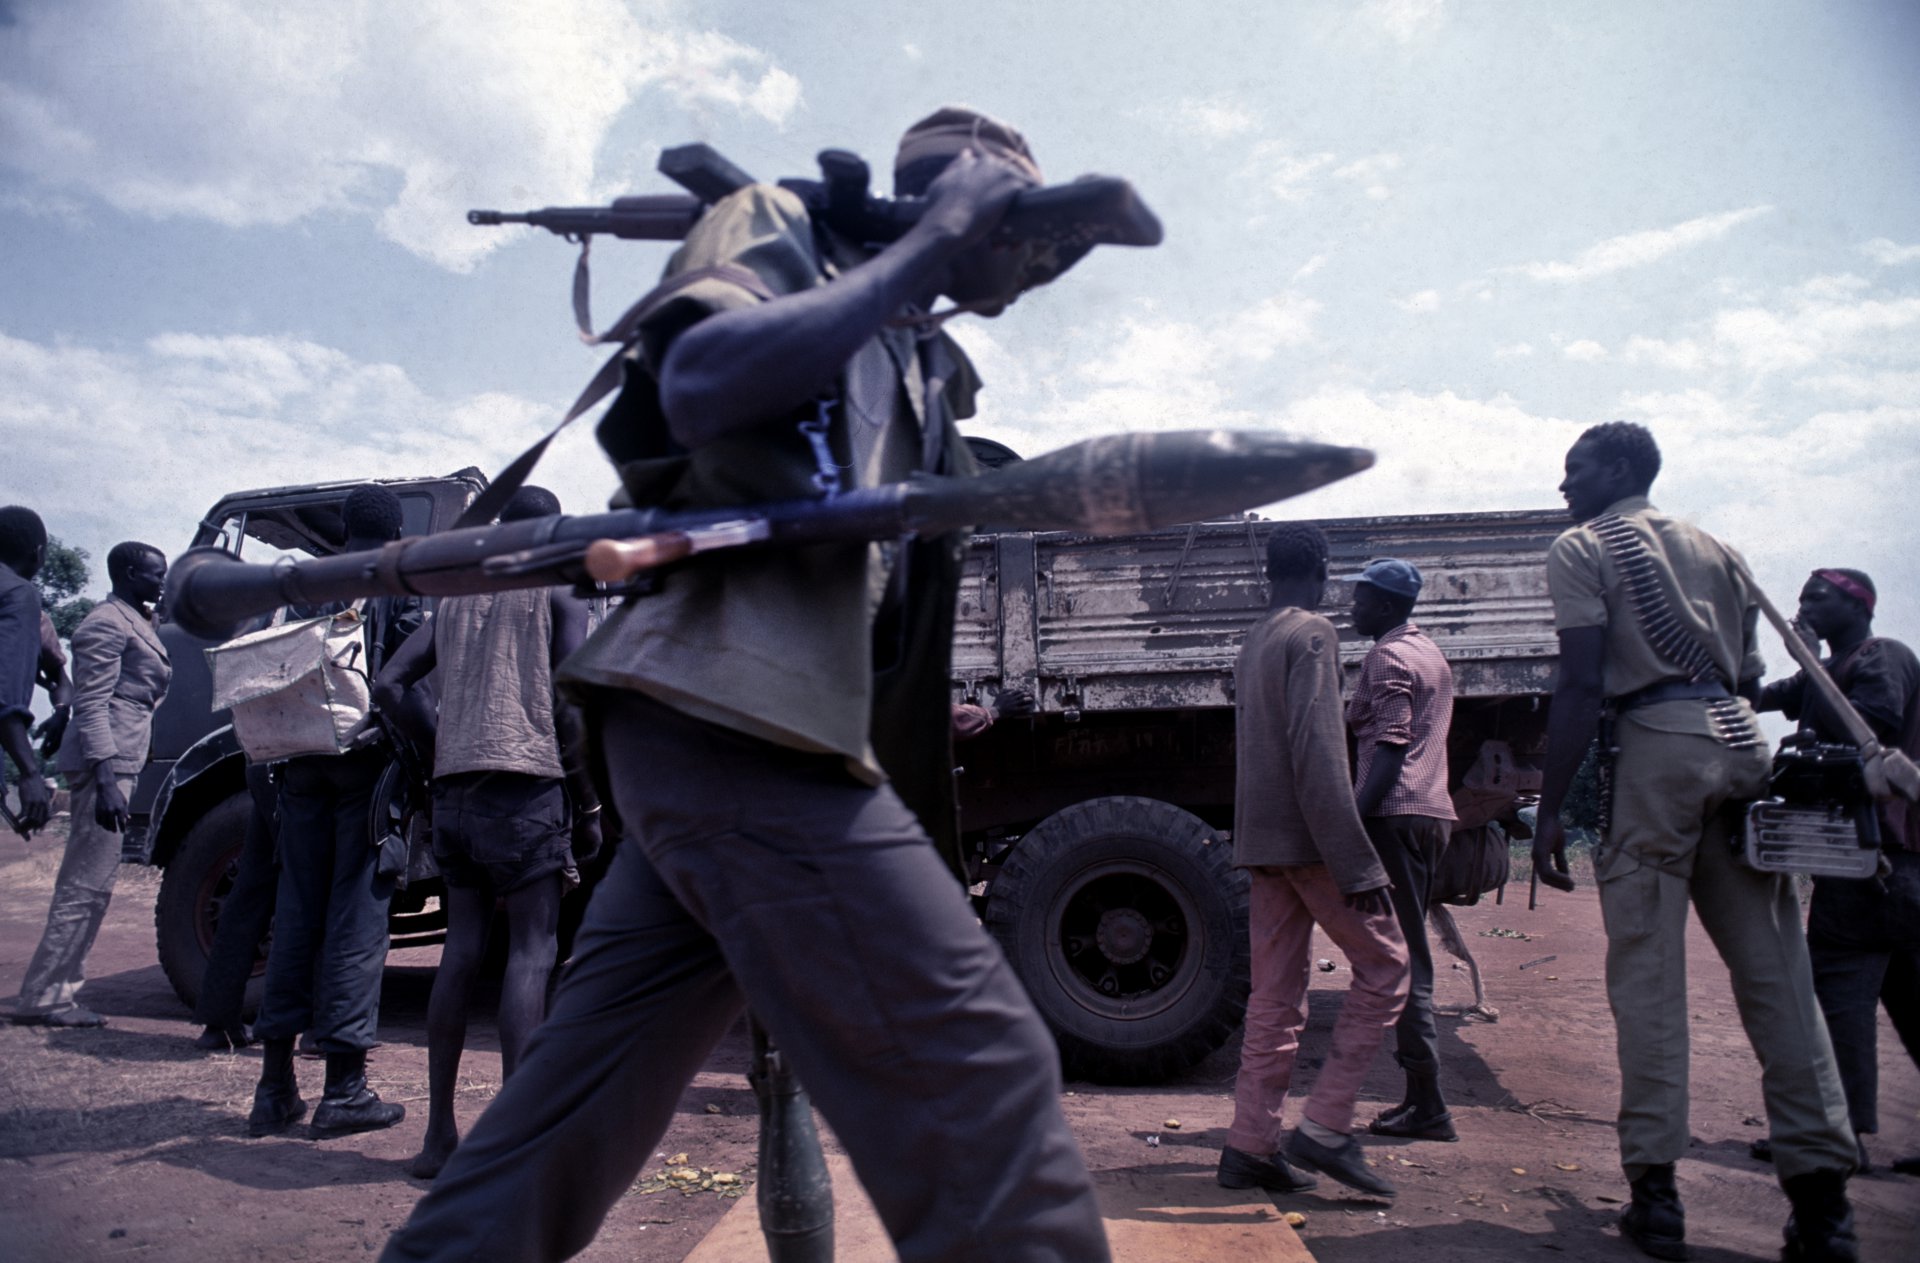  SPLA soldiers on the way to the frontline. Southern Sudan, 1991 